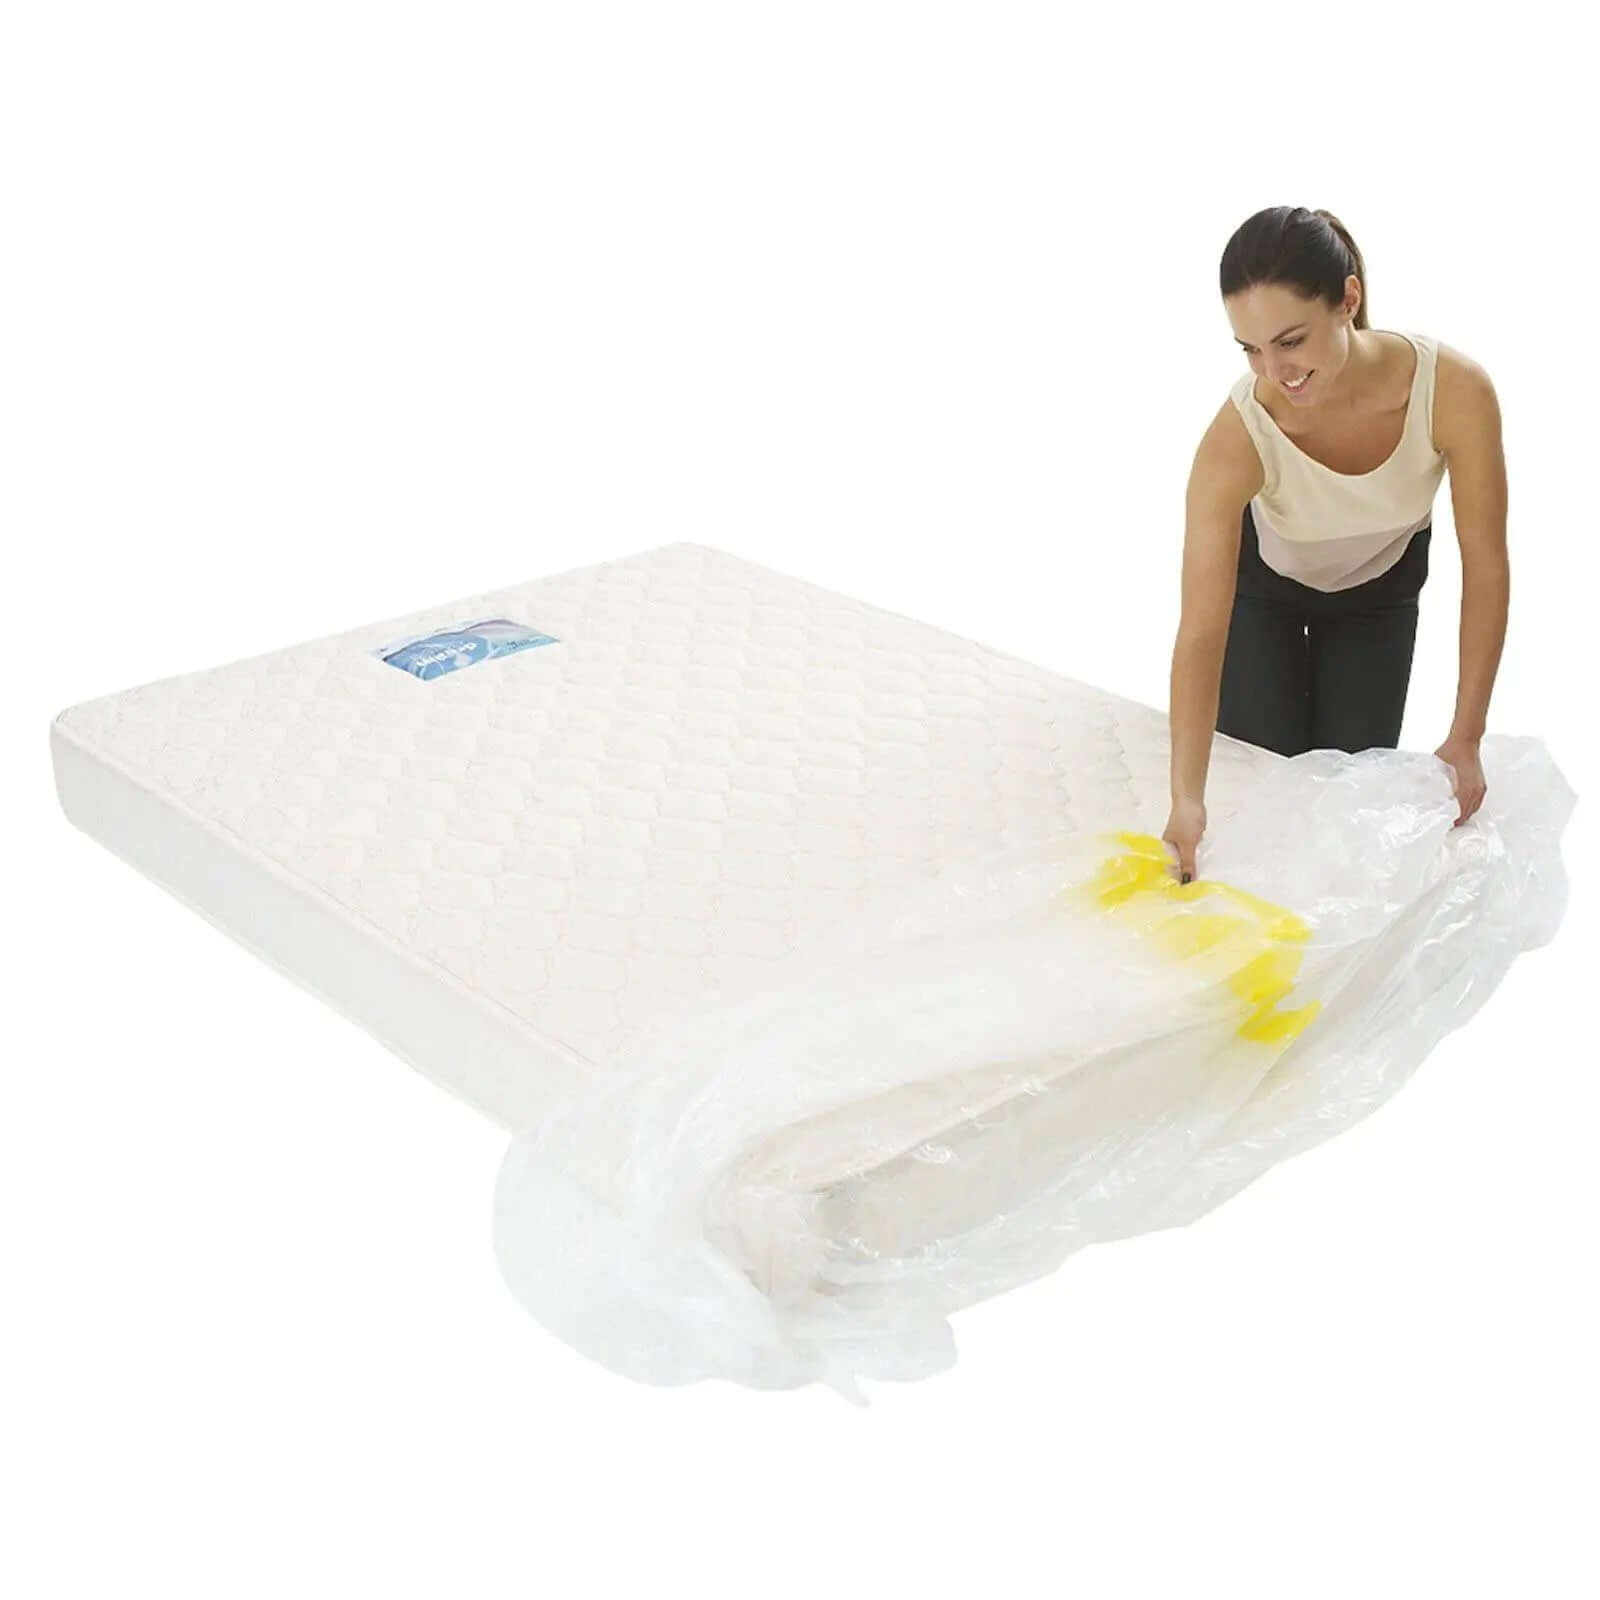 Heavy Duty Mattress Covers King/Queen - 2 PACK   Storage Bags and Covers Packstore Australia Packstore